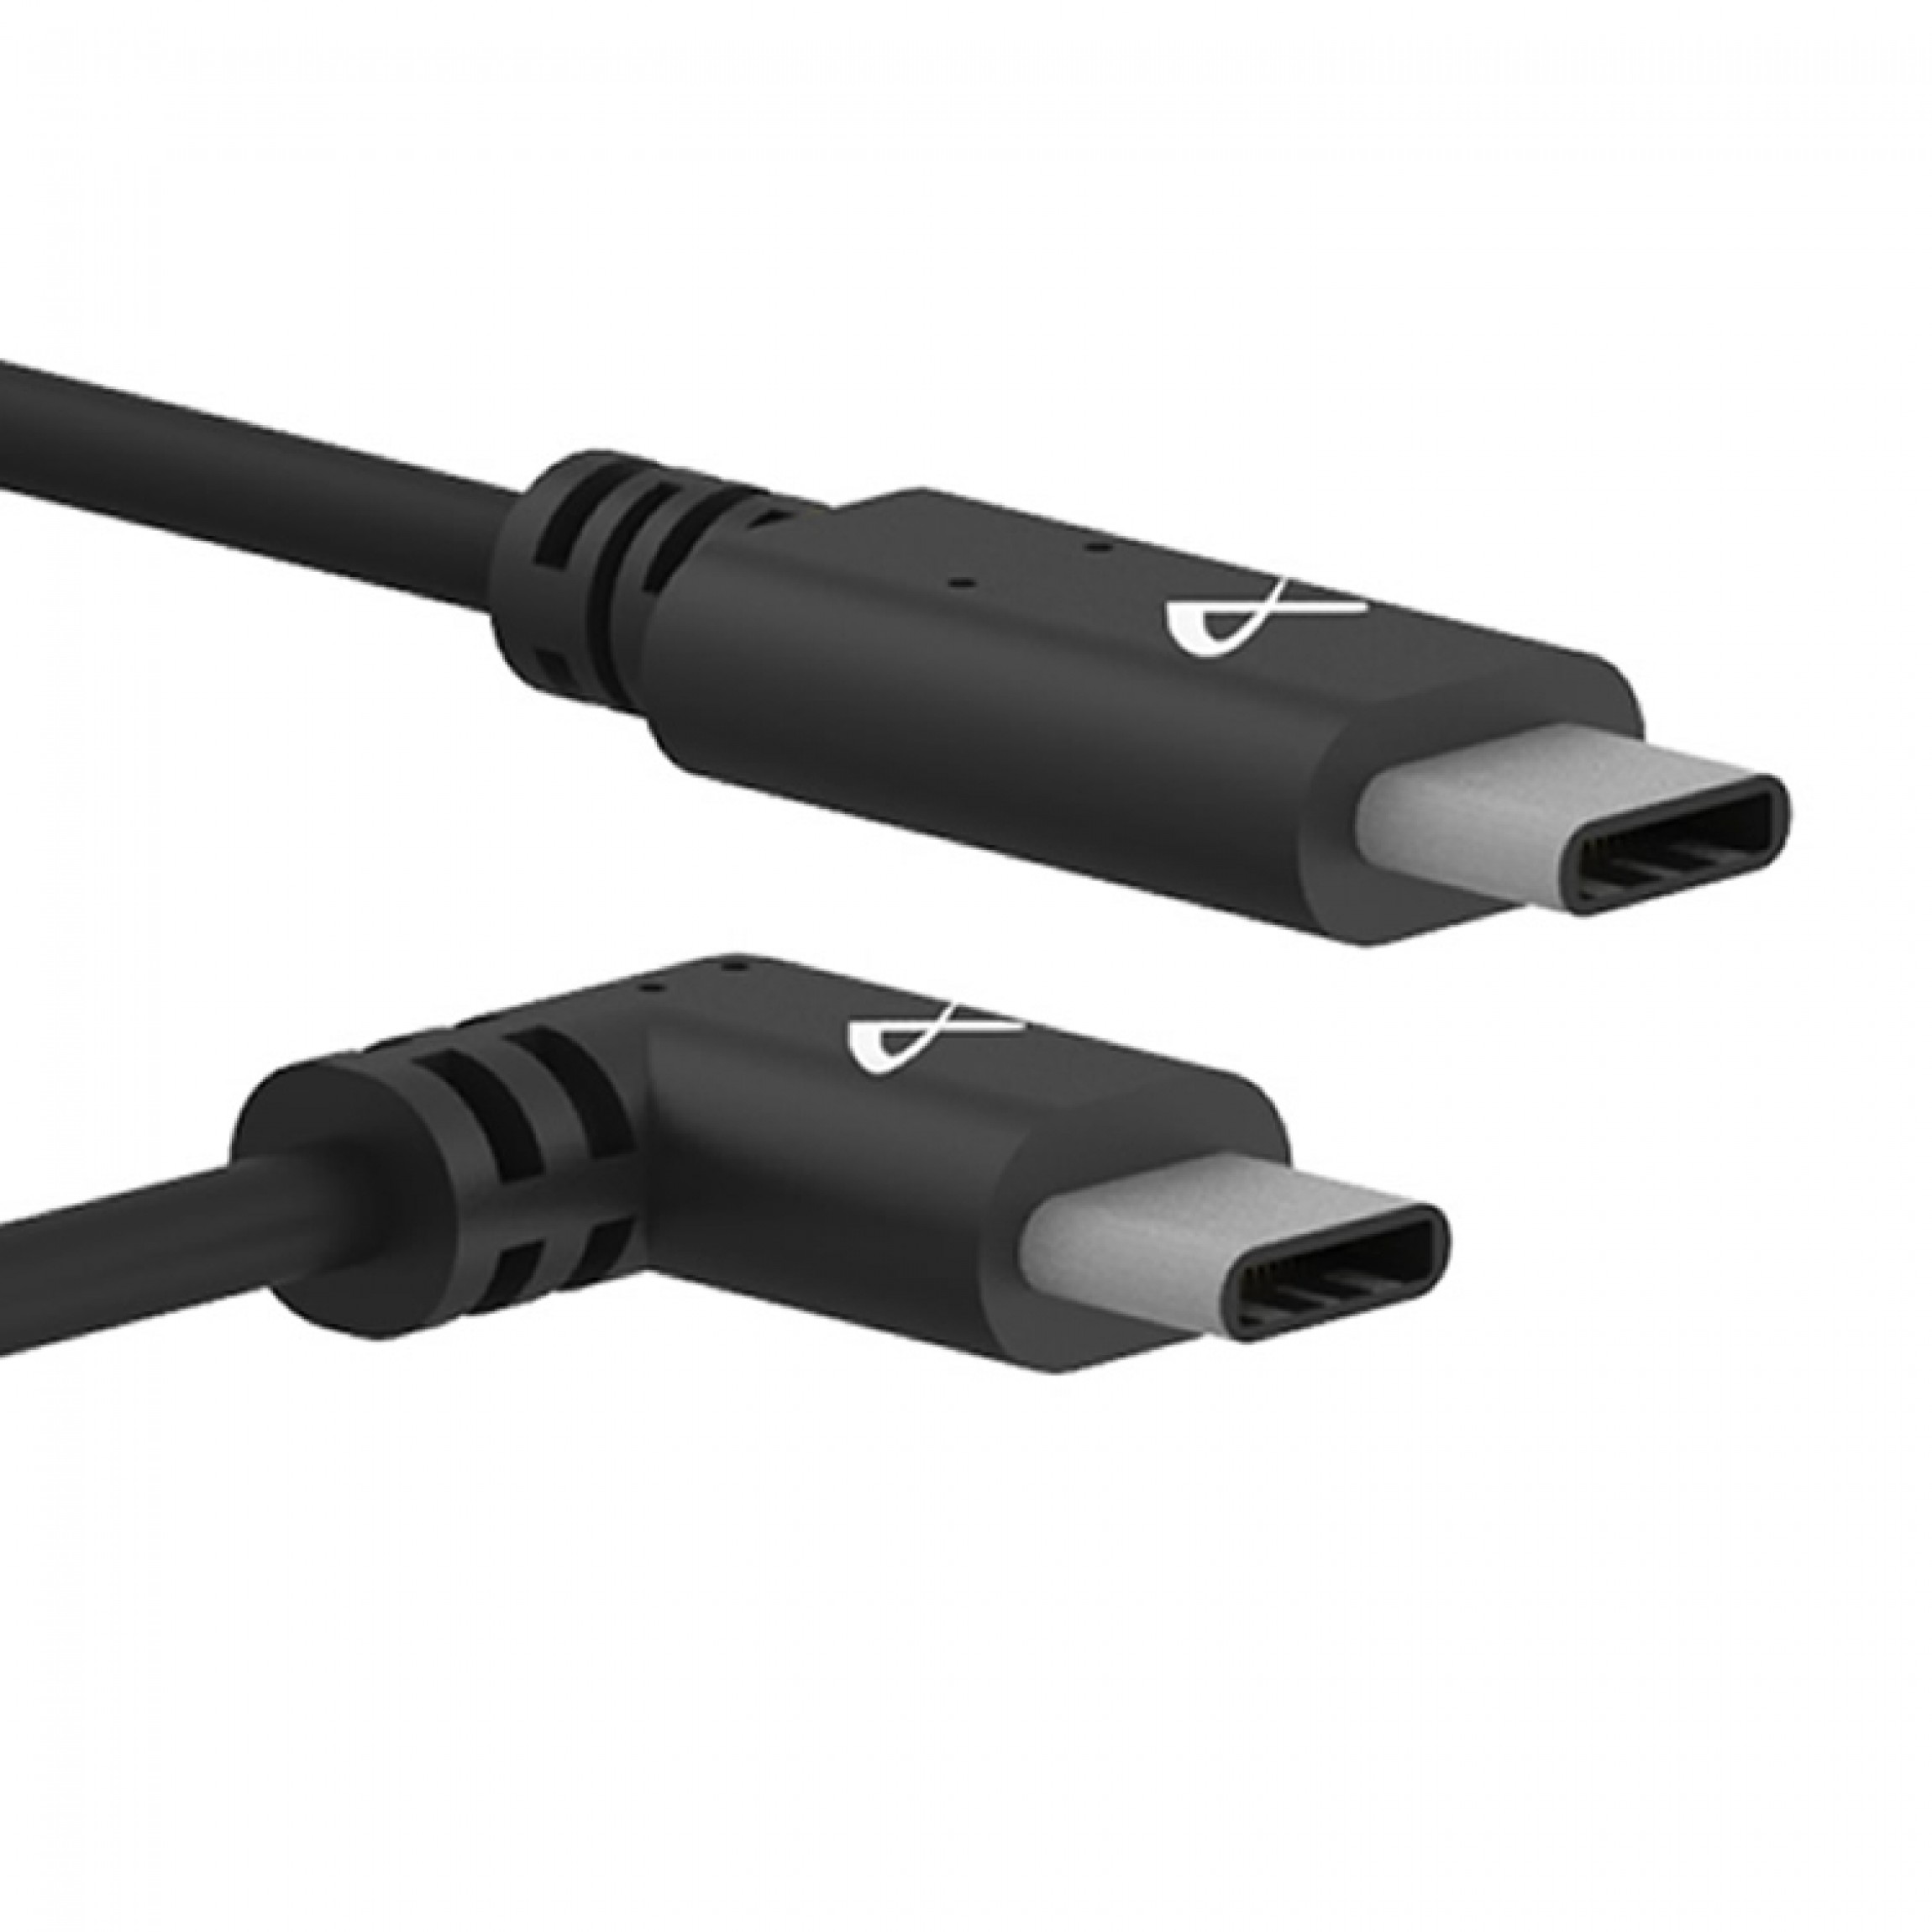 USB-A to USB-C Industrial Power Cable, 90 Degree, 10ft, Black